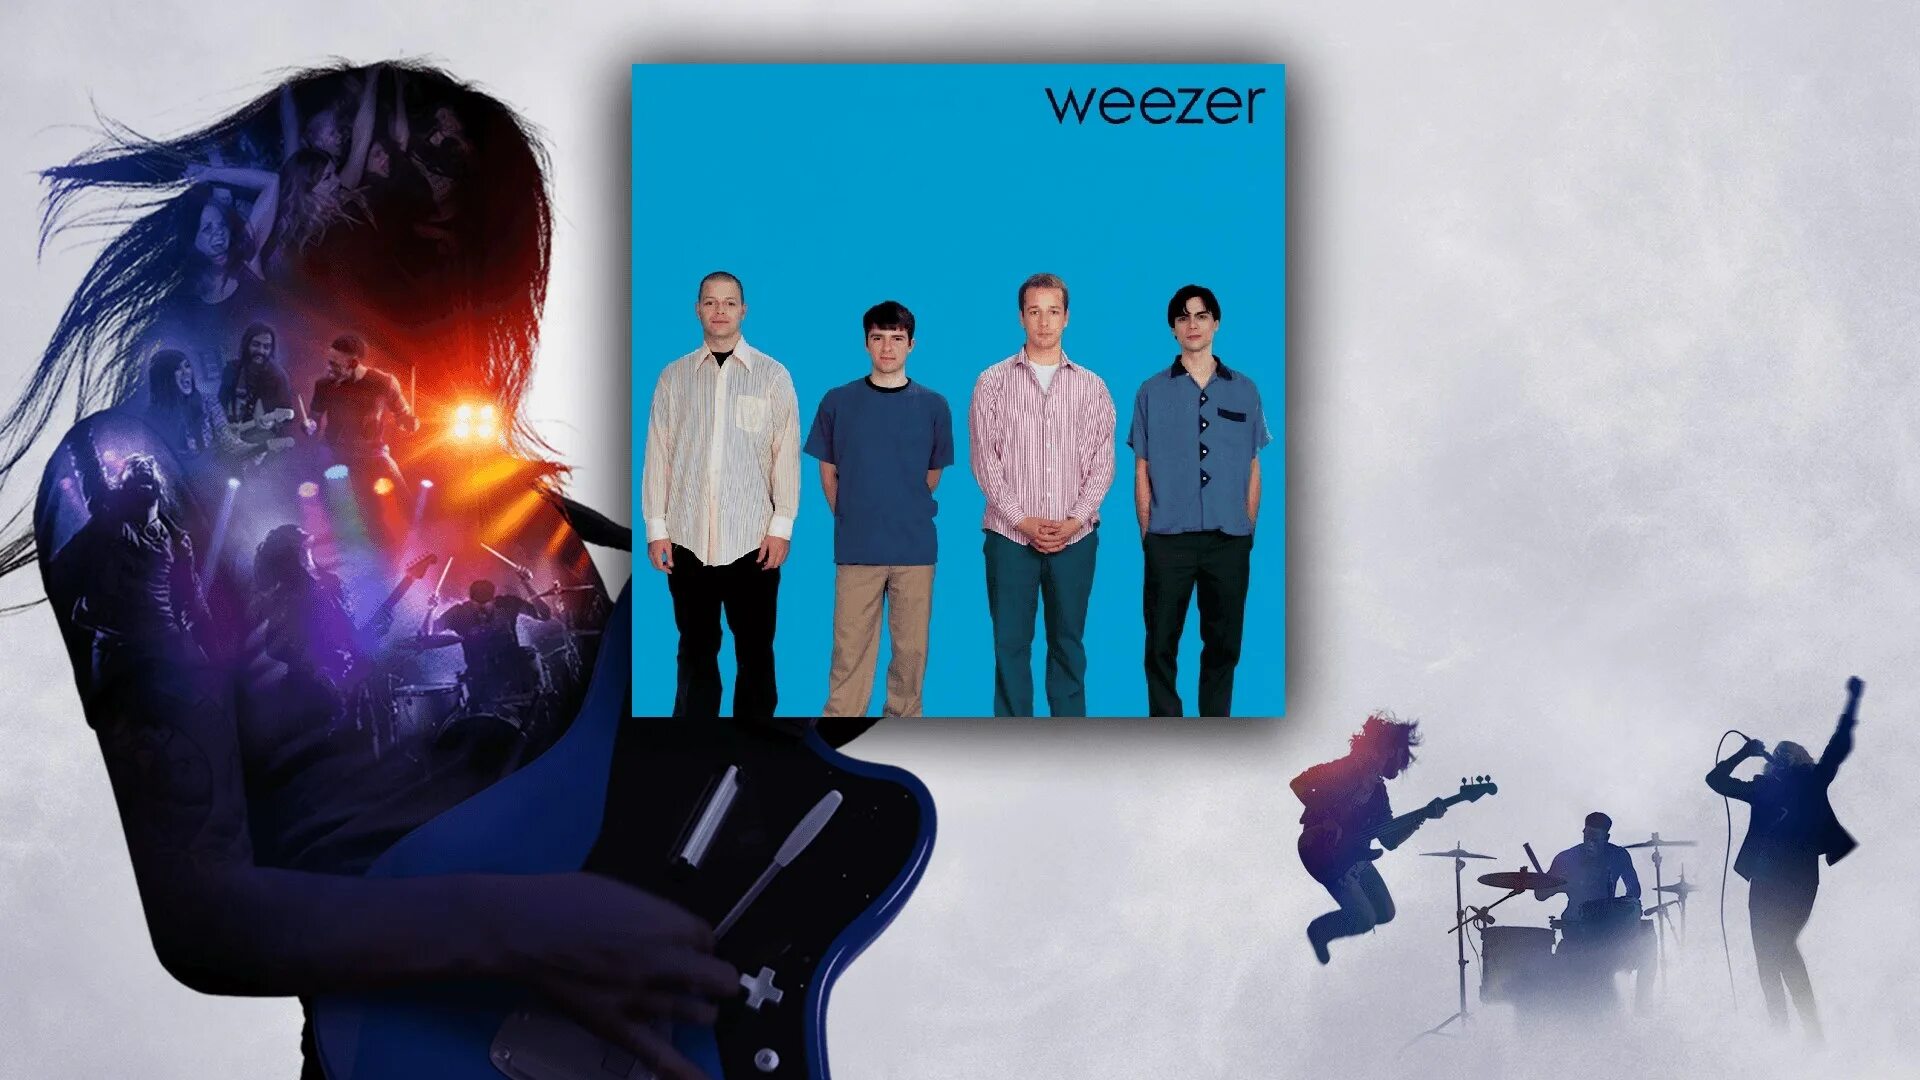 Say it discover. Weezer. Say it aint so. Say Ain't so. Say it! - KILLFI $H.